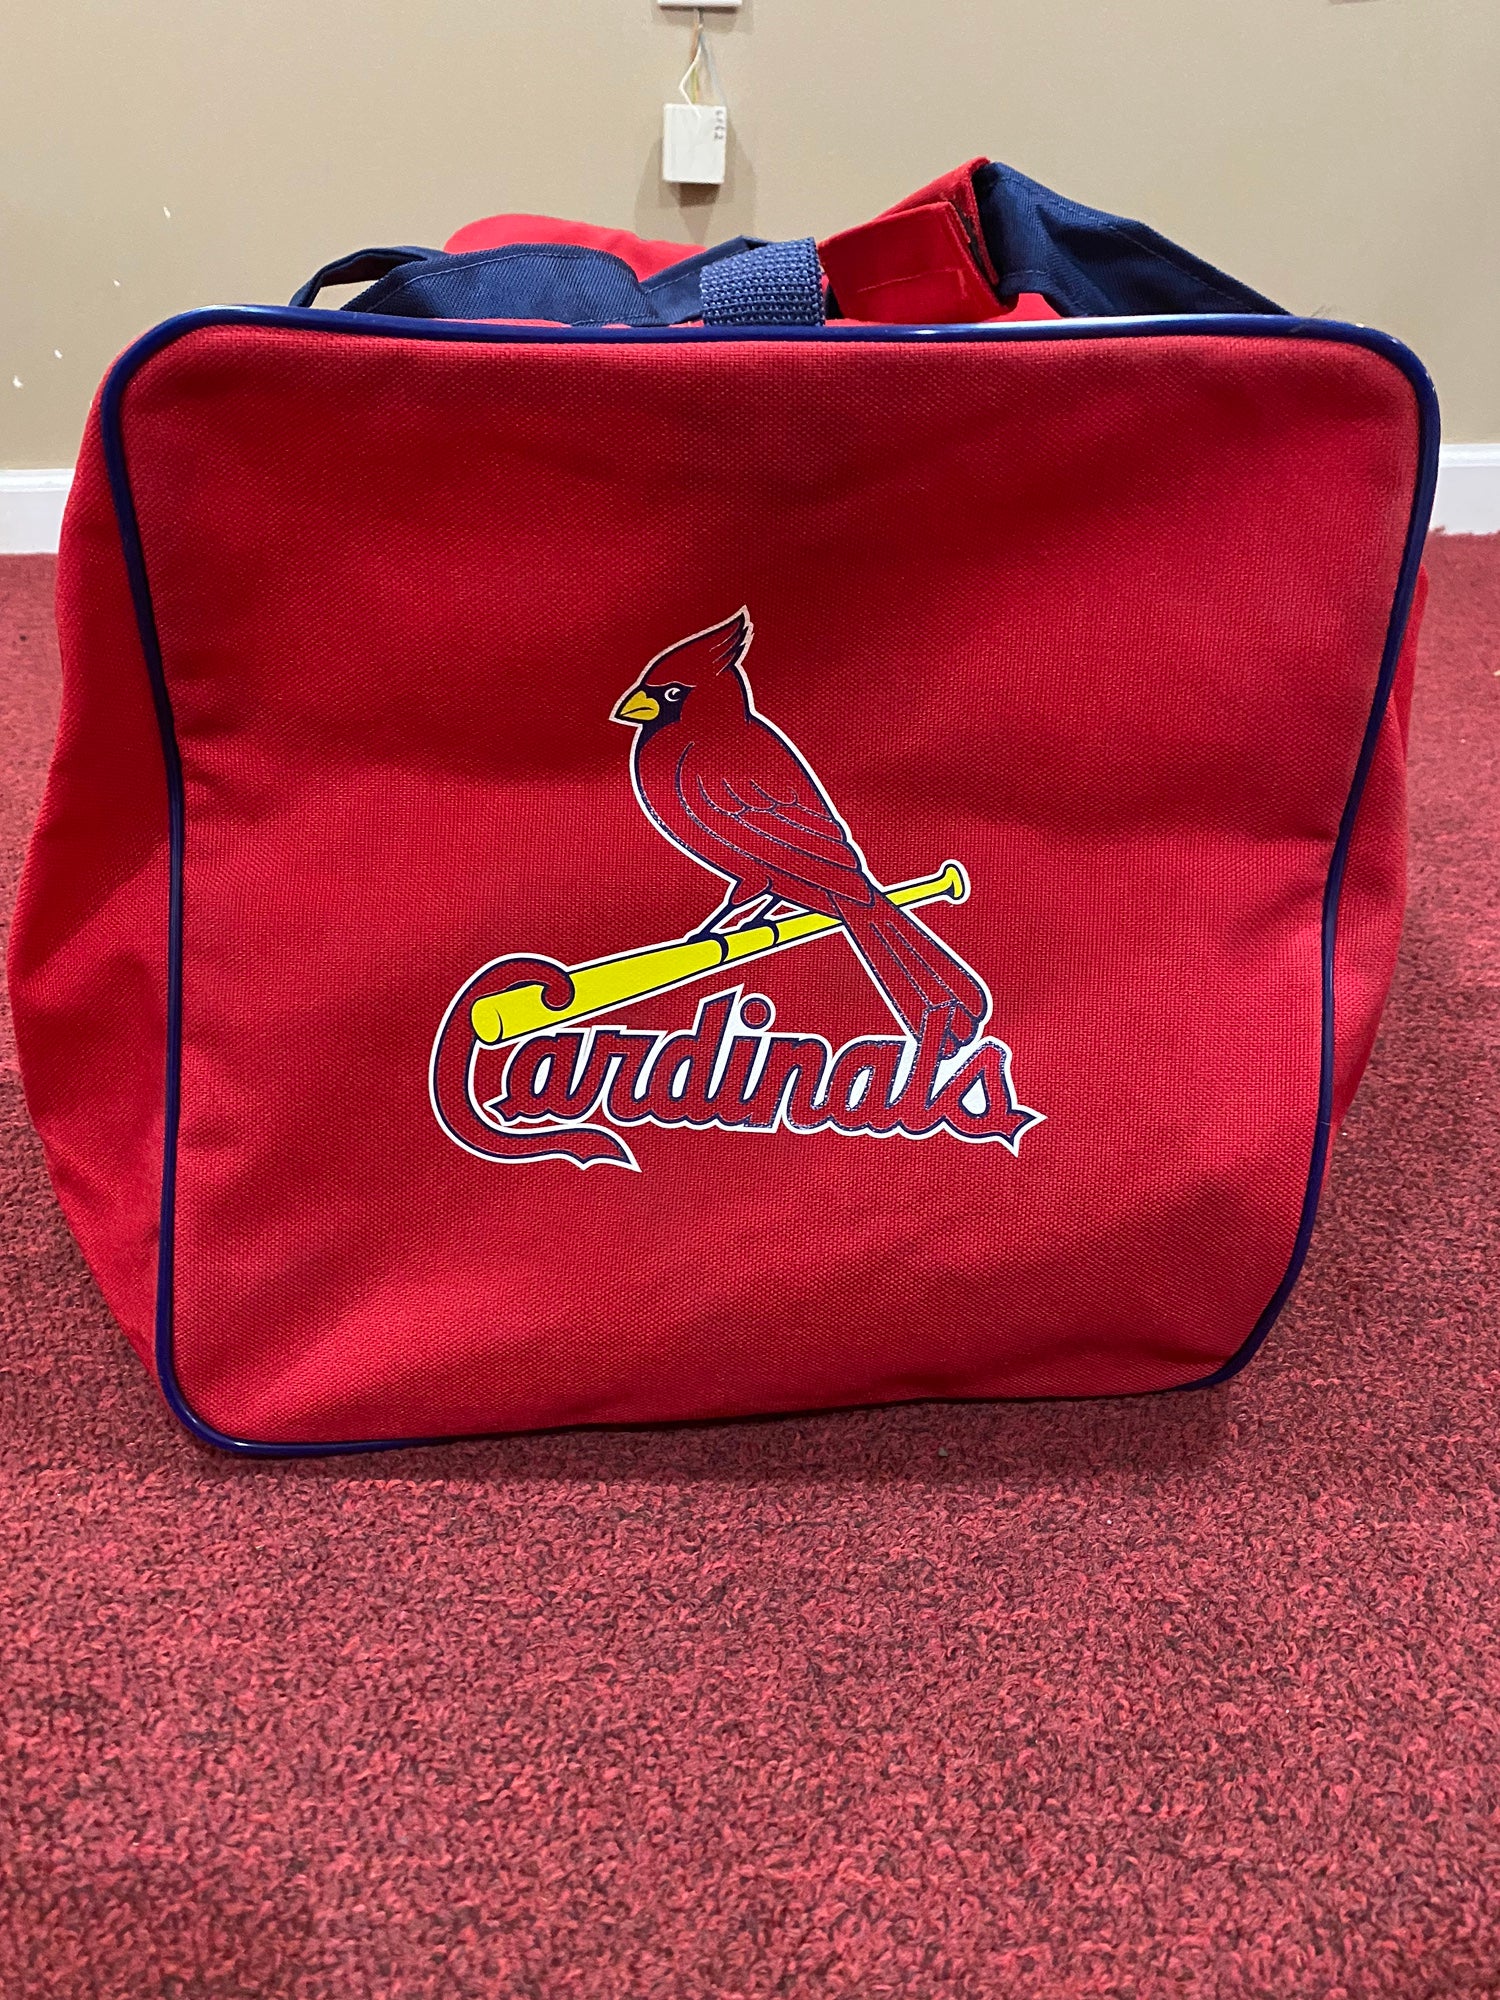 st louis cardinals luggage